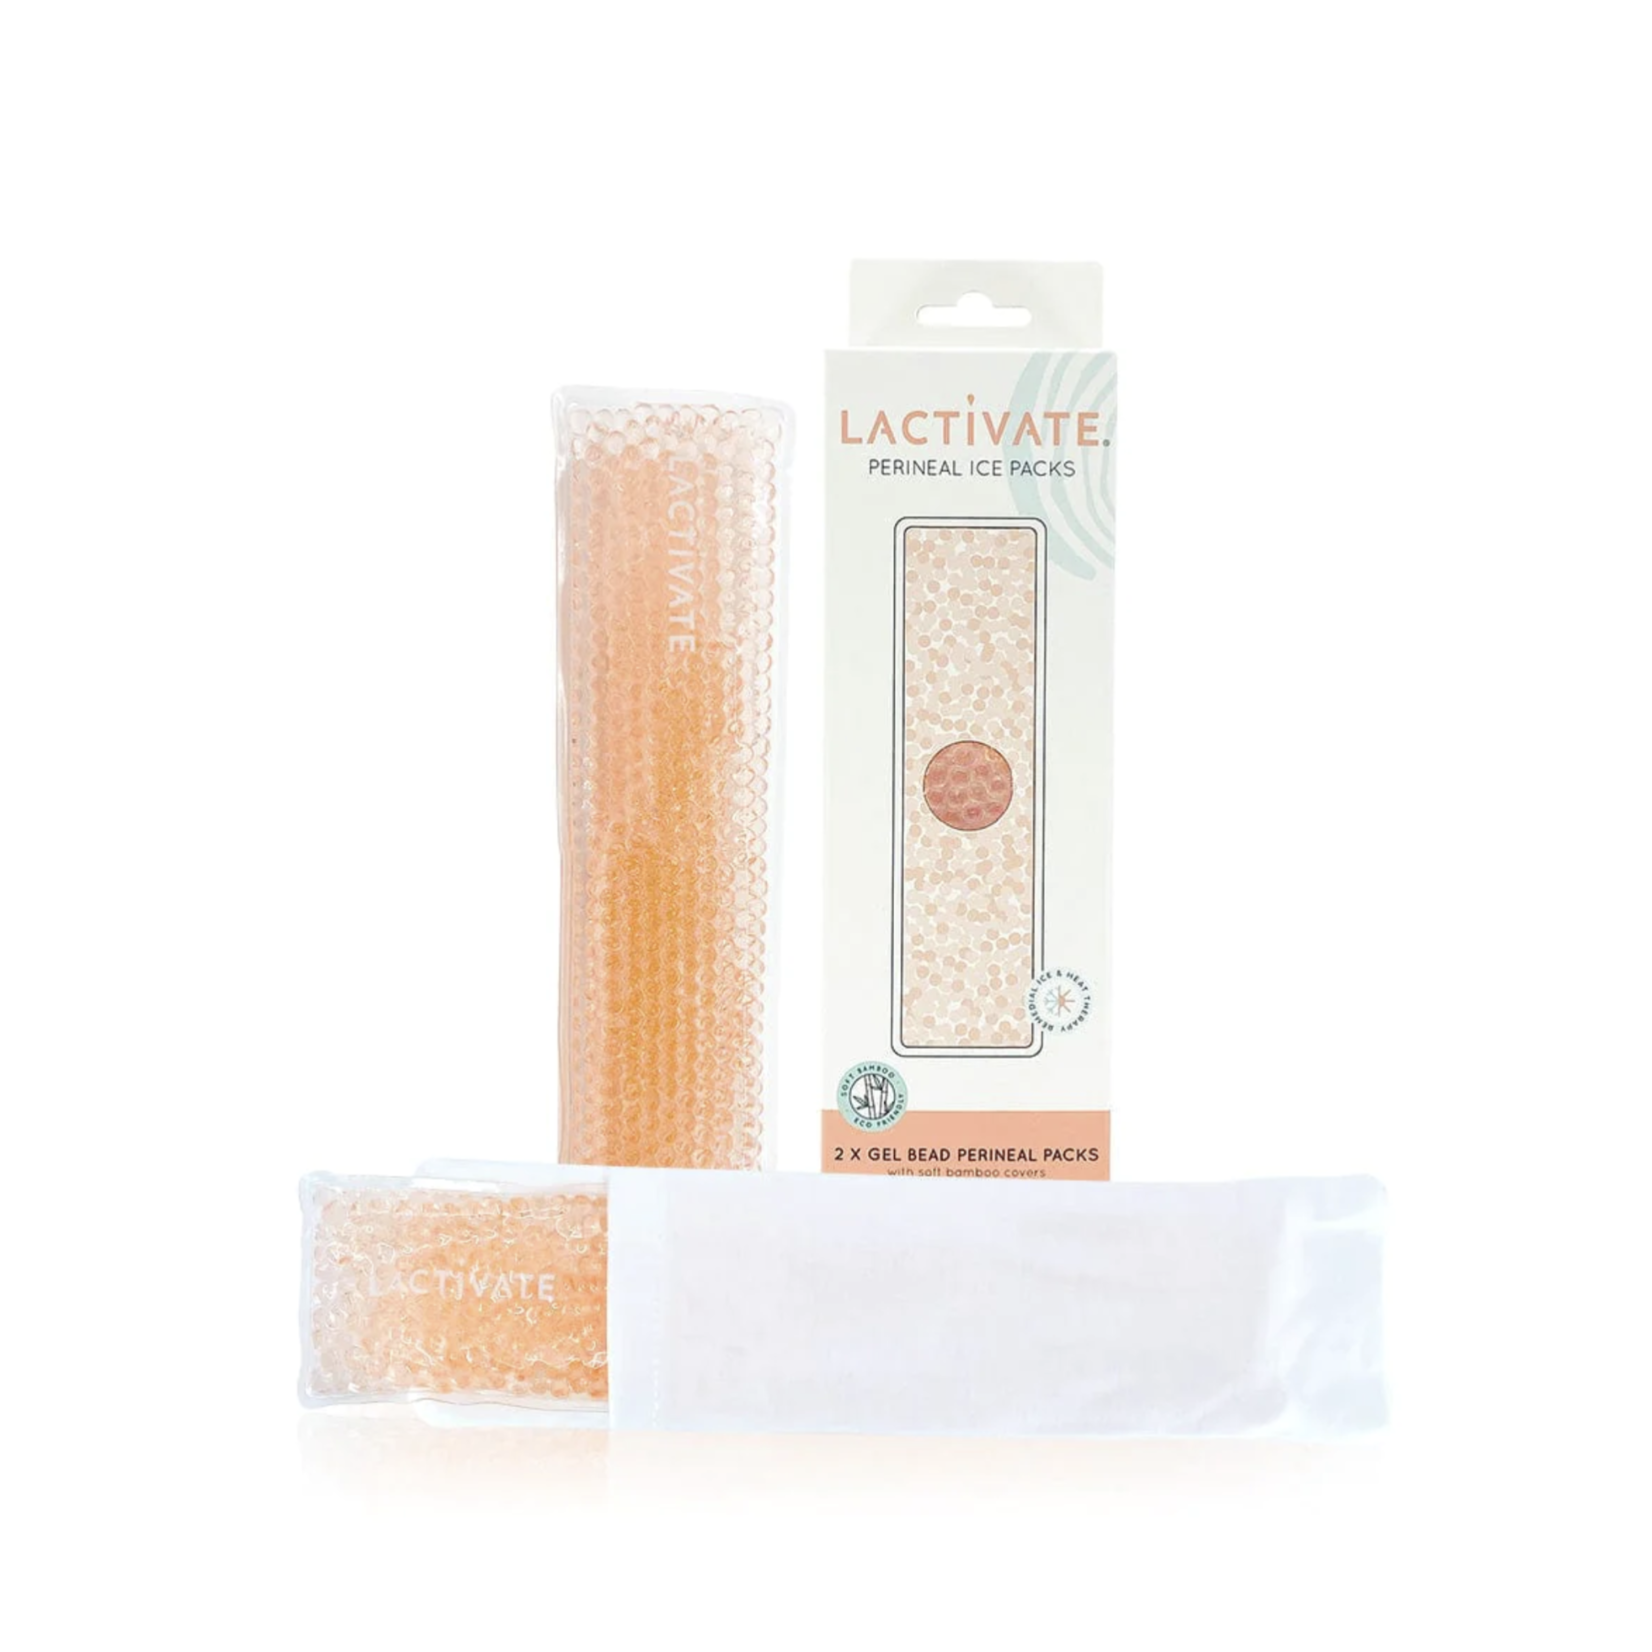 Lactivate® Perineal Ice Packs